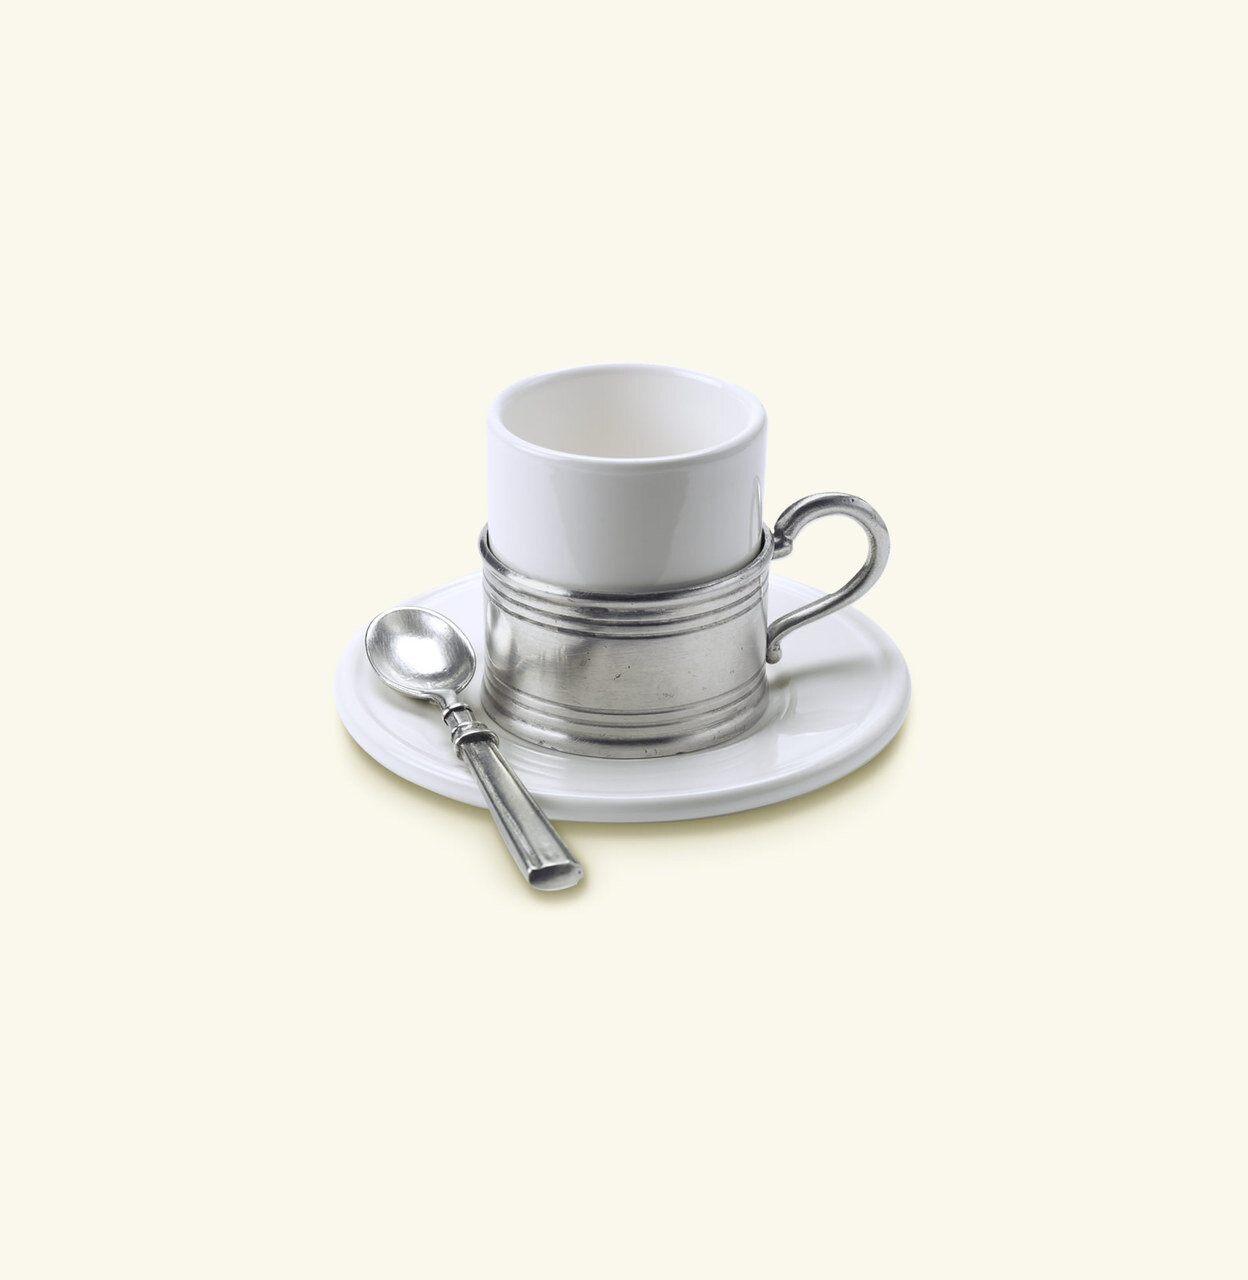 Match Pewter Espresso Cup With Ceramic Saucer 710.5